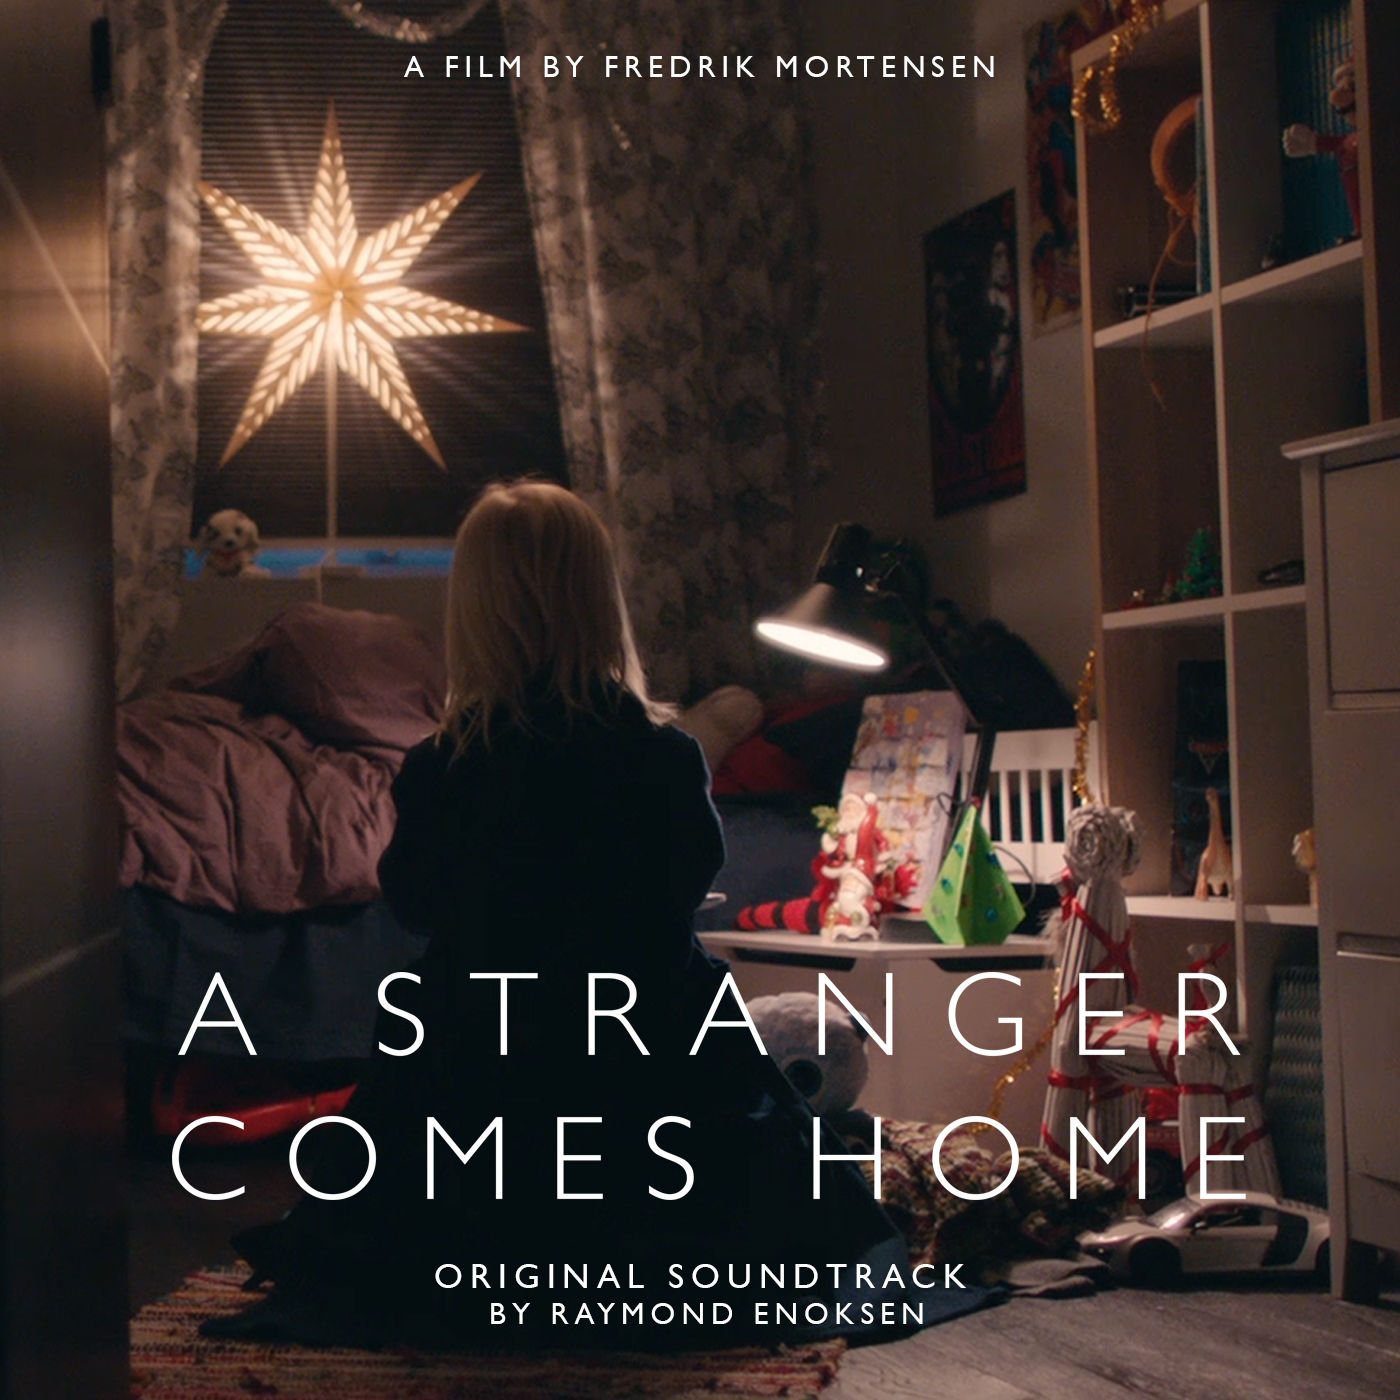 Home OST. Home soundtrack